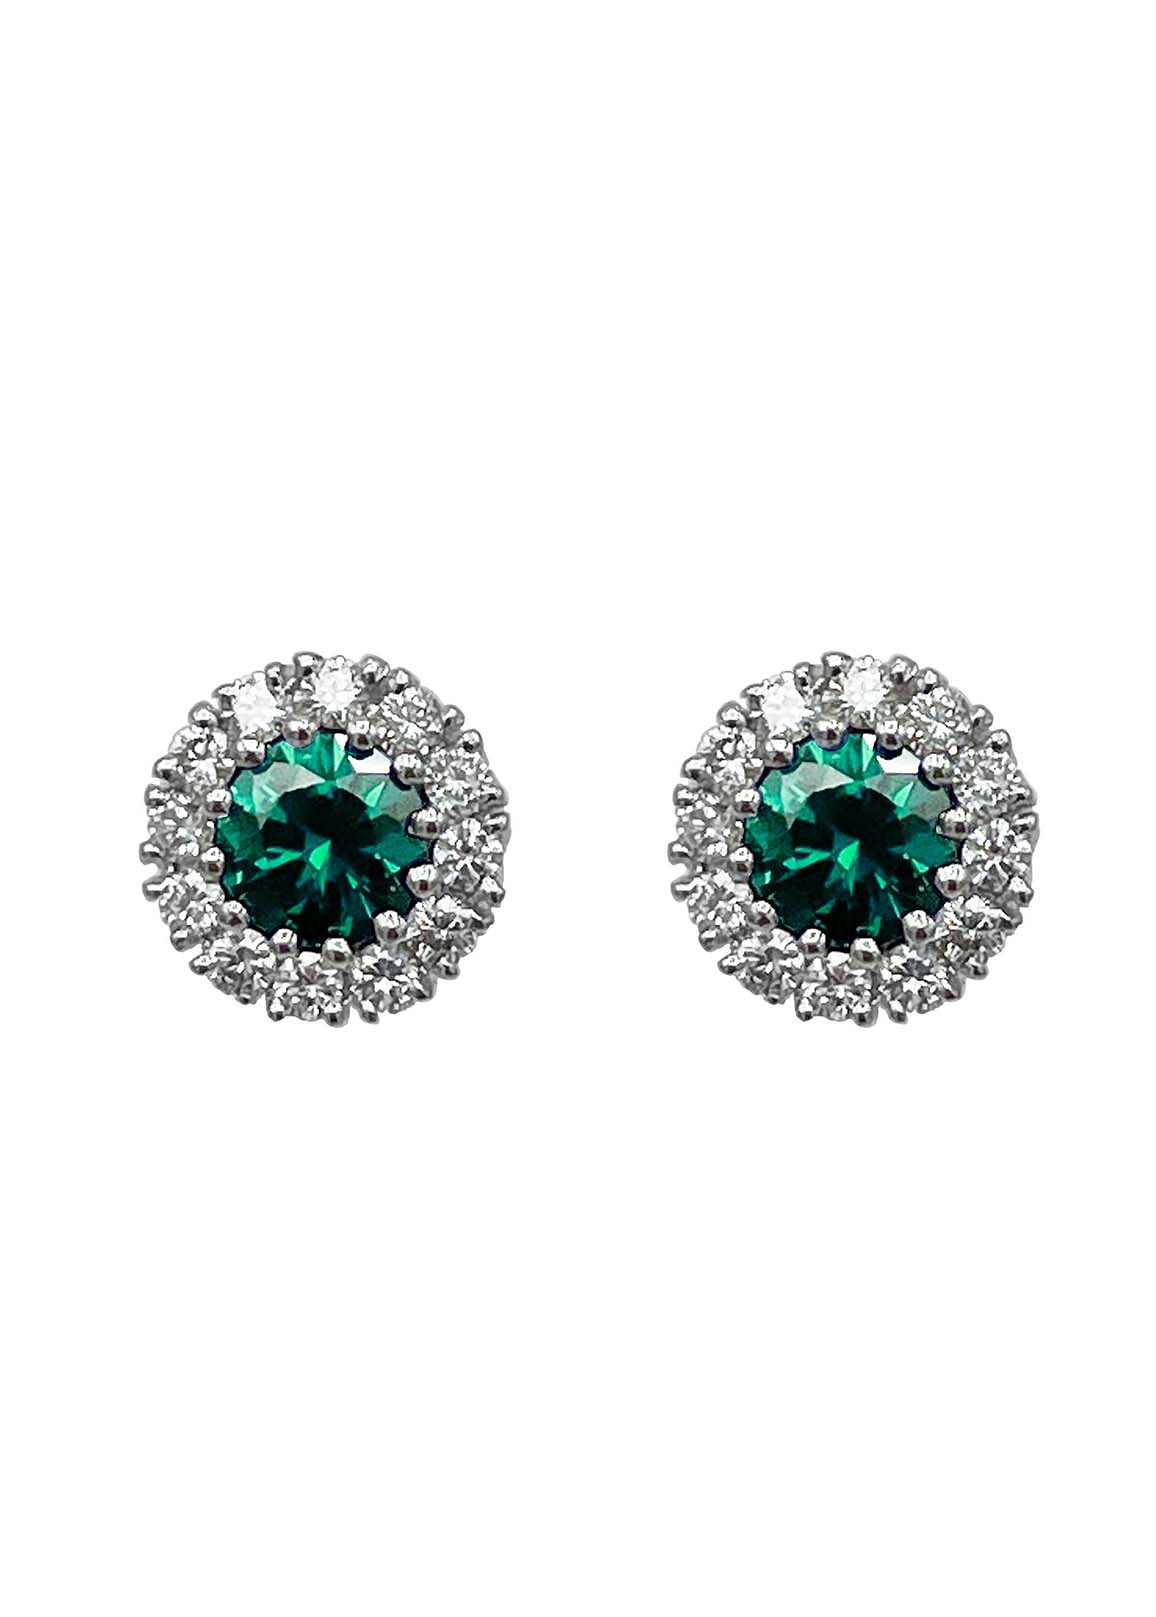 18k White Gold Stud Earrings with Emerald and Diamonds Image